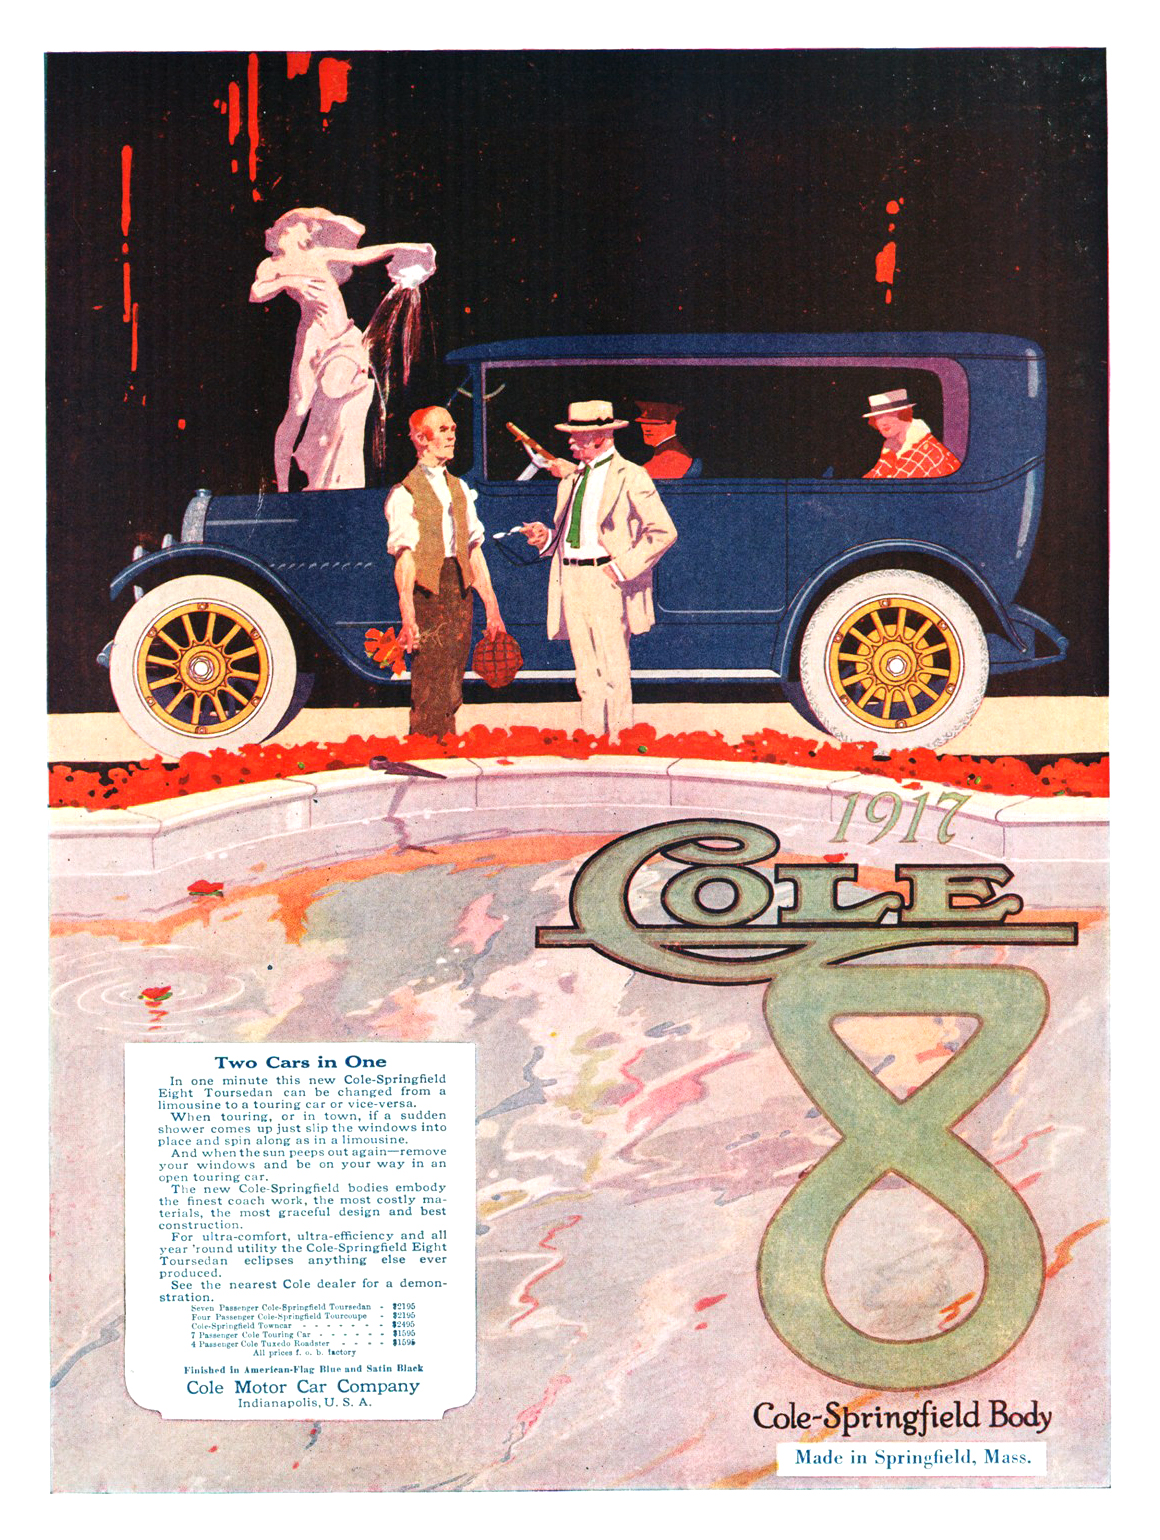 1917 Cole-Springfield Eight Seven-Passenger Toursedan Ad (August, 1916) - Two Cars in One